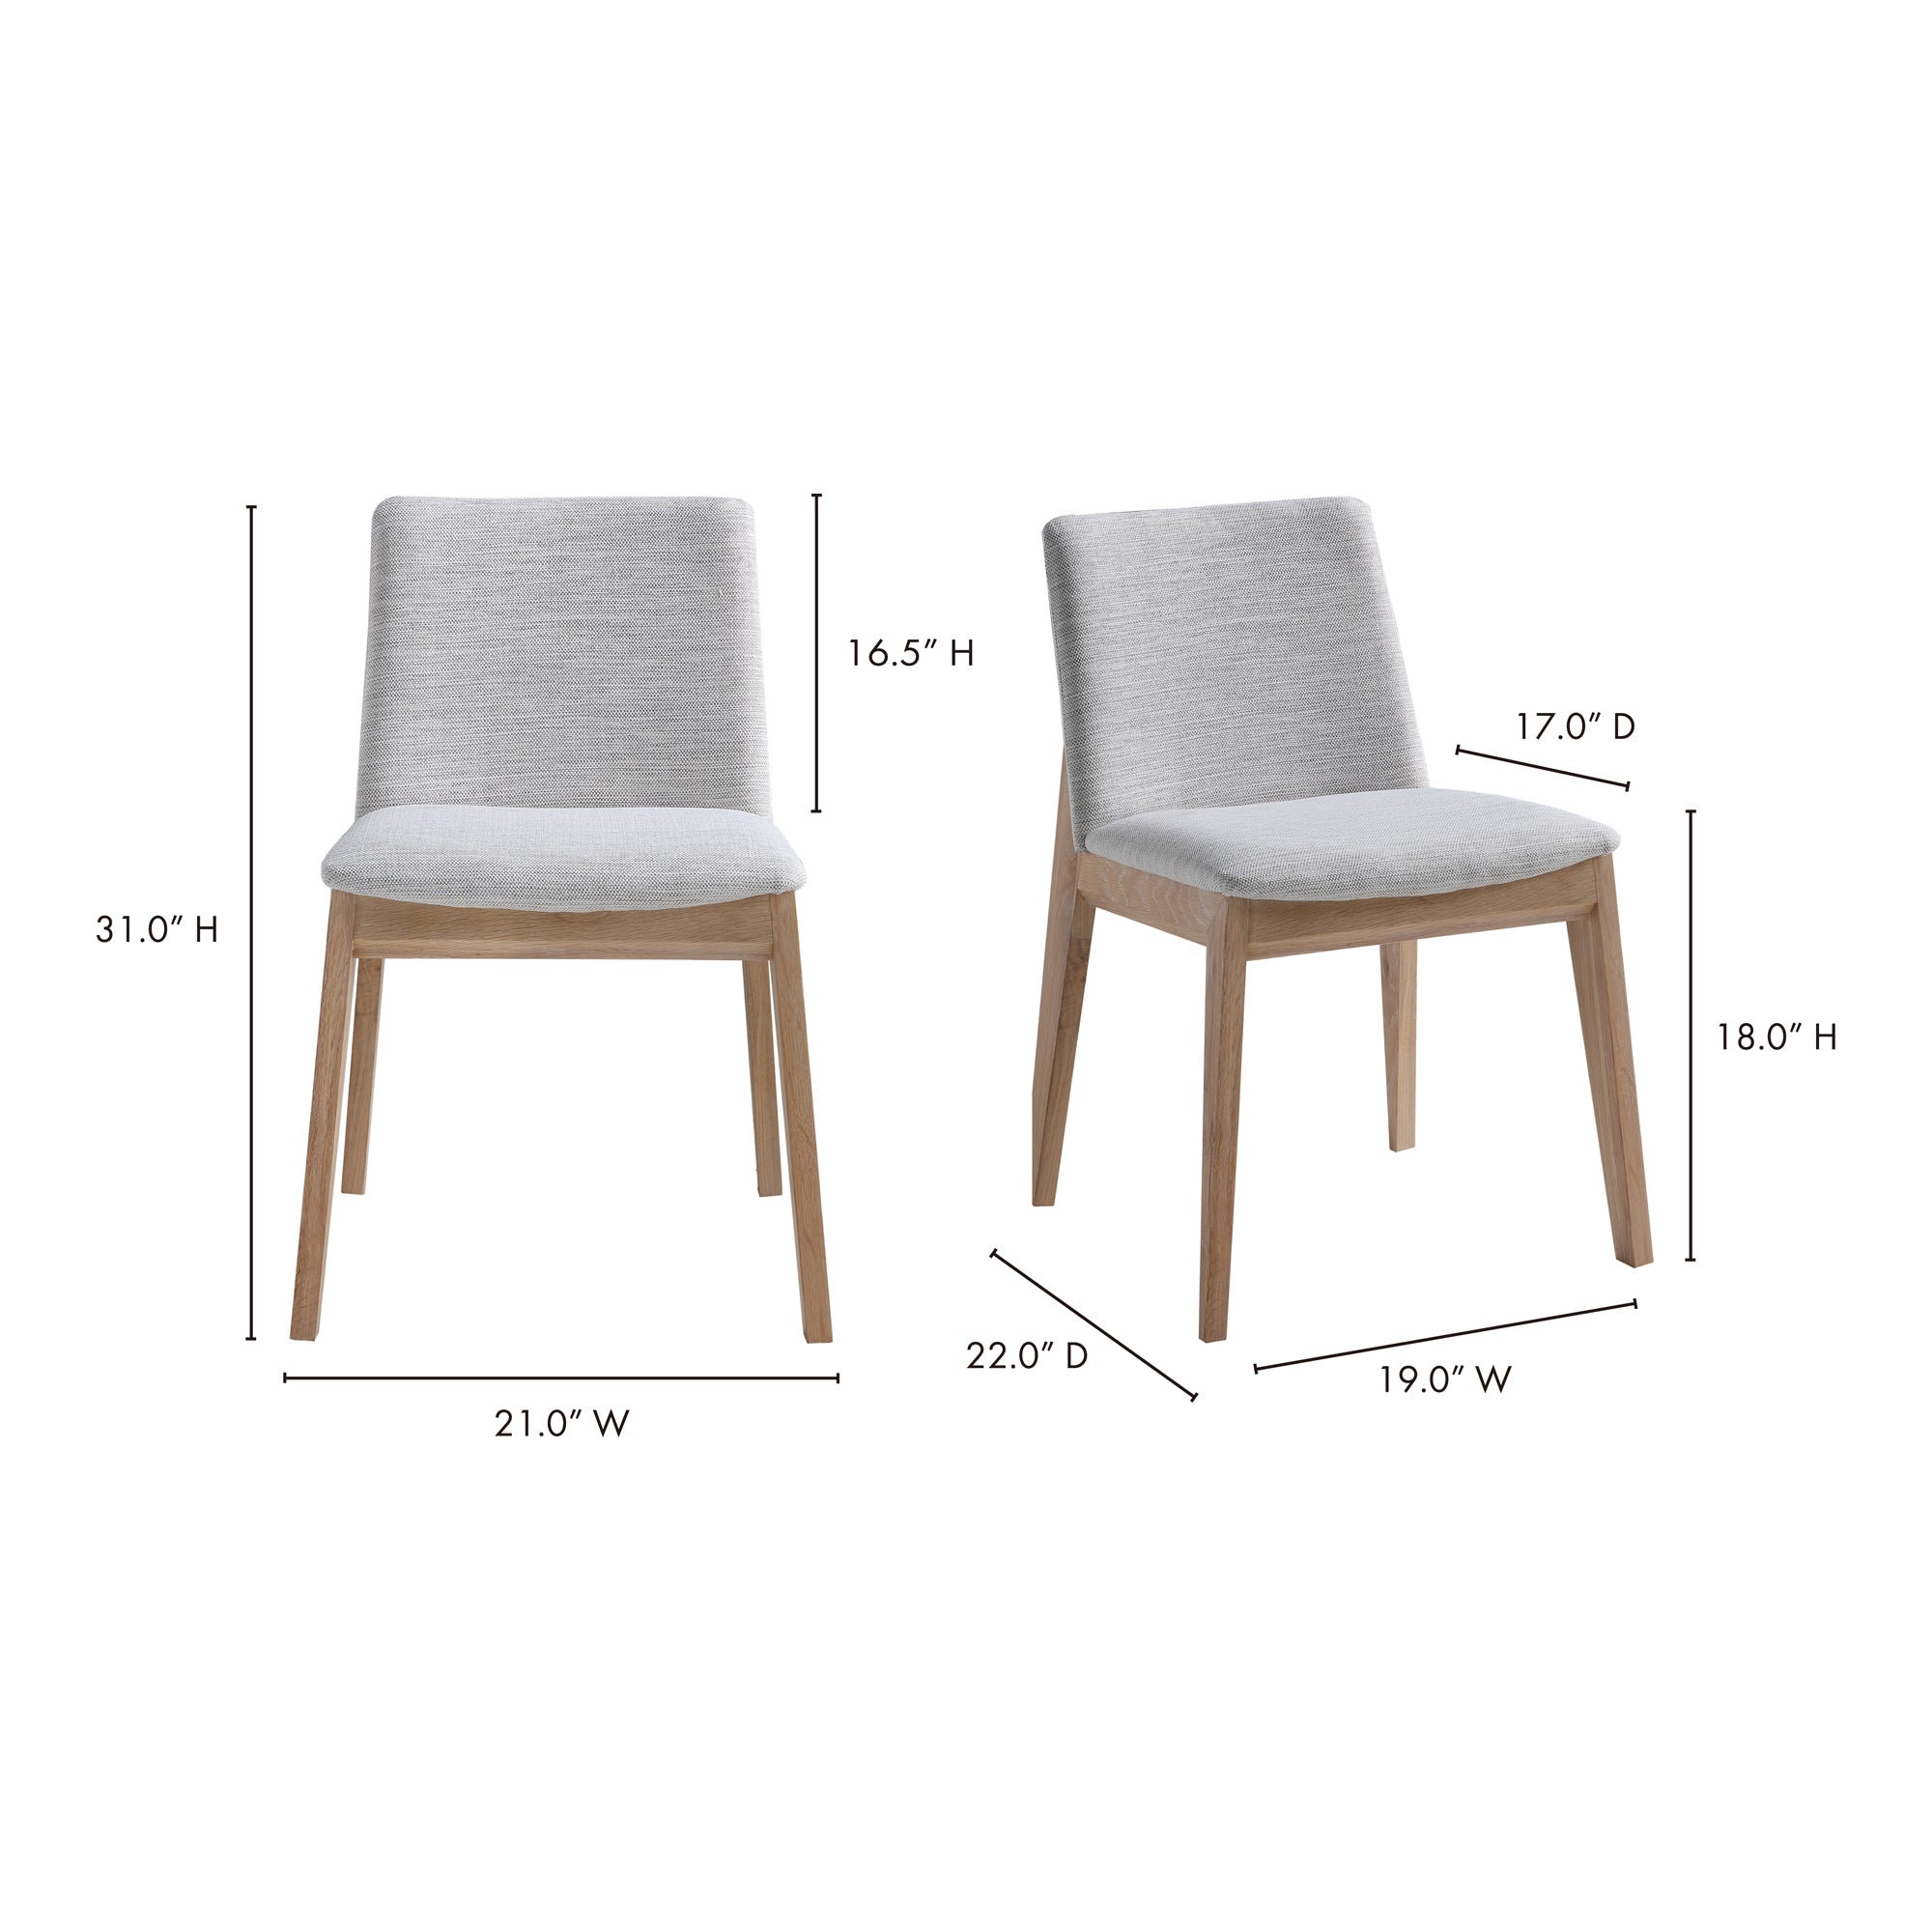 Deco Oak Dining Chair Light Grey - Set Of Two